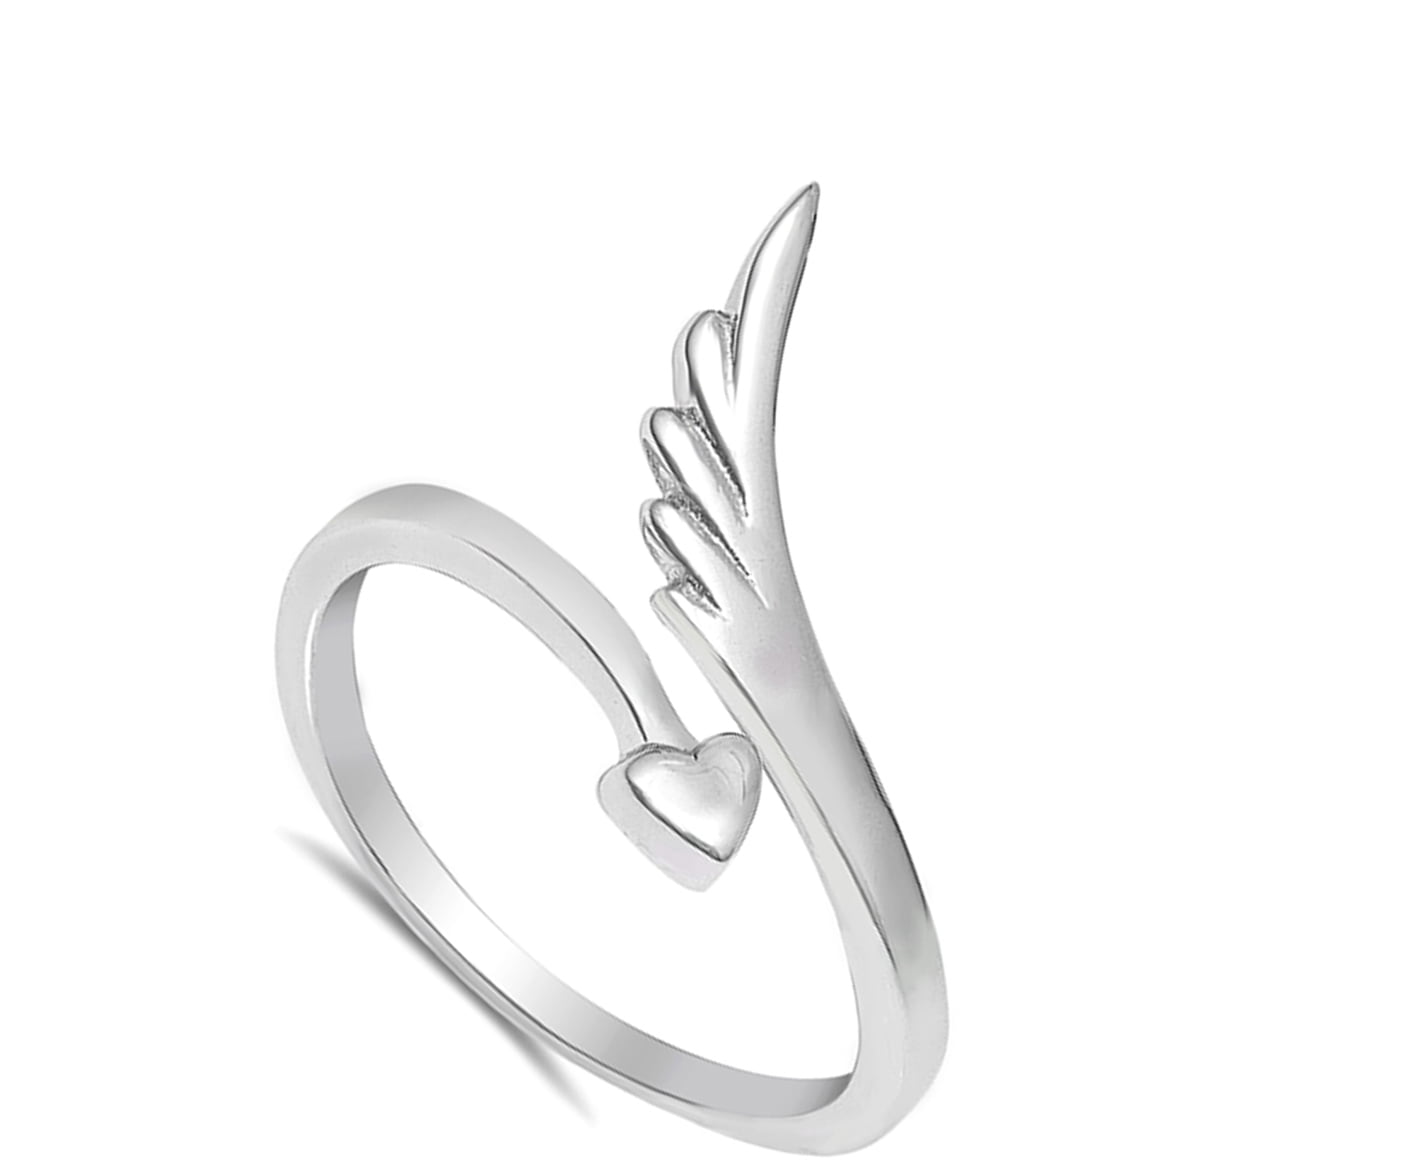 Wing Heart Promise Arrow Open Cute Ring New .925 Sterling Silver Band Sizes 4-10